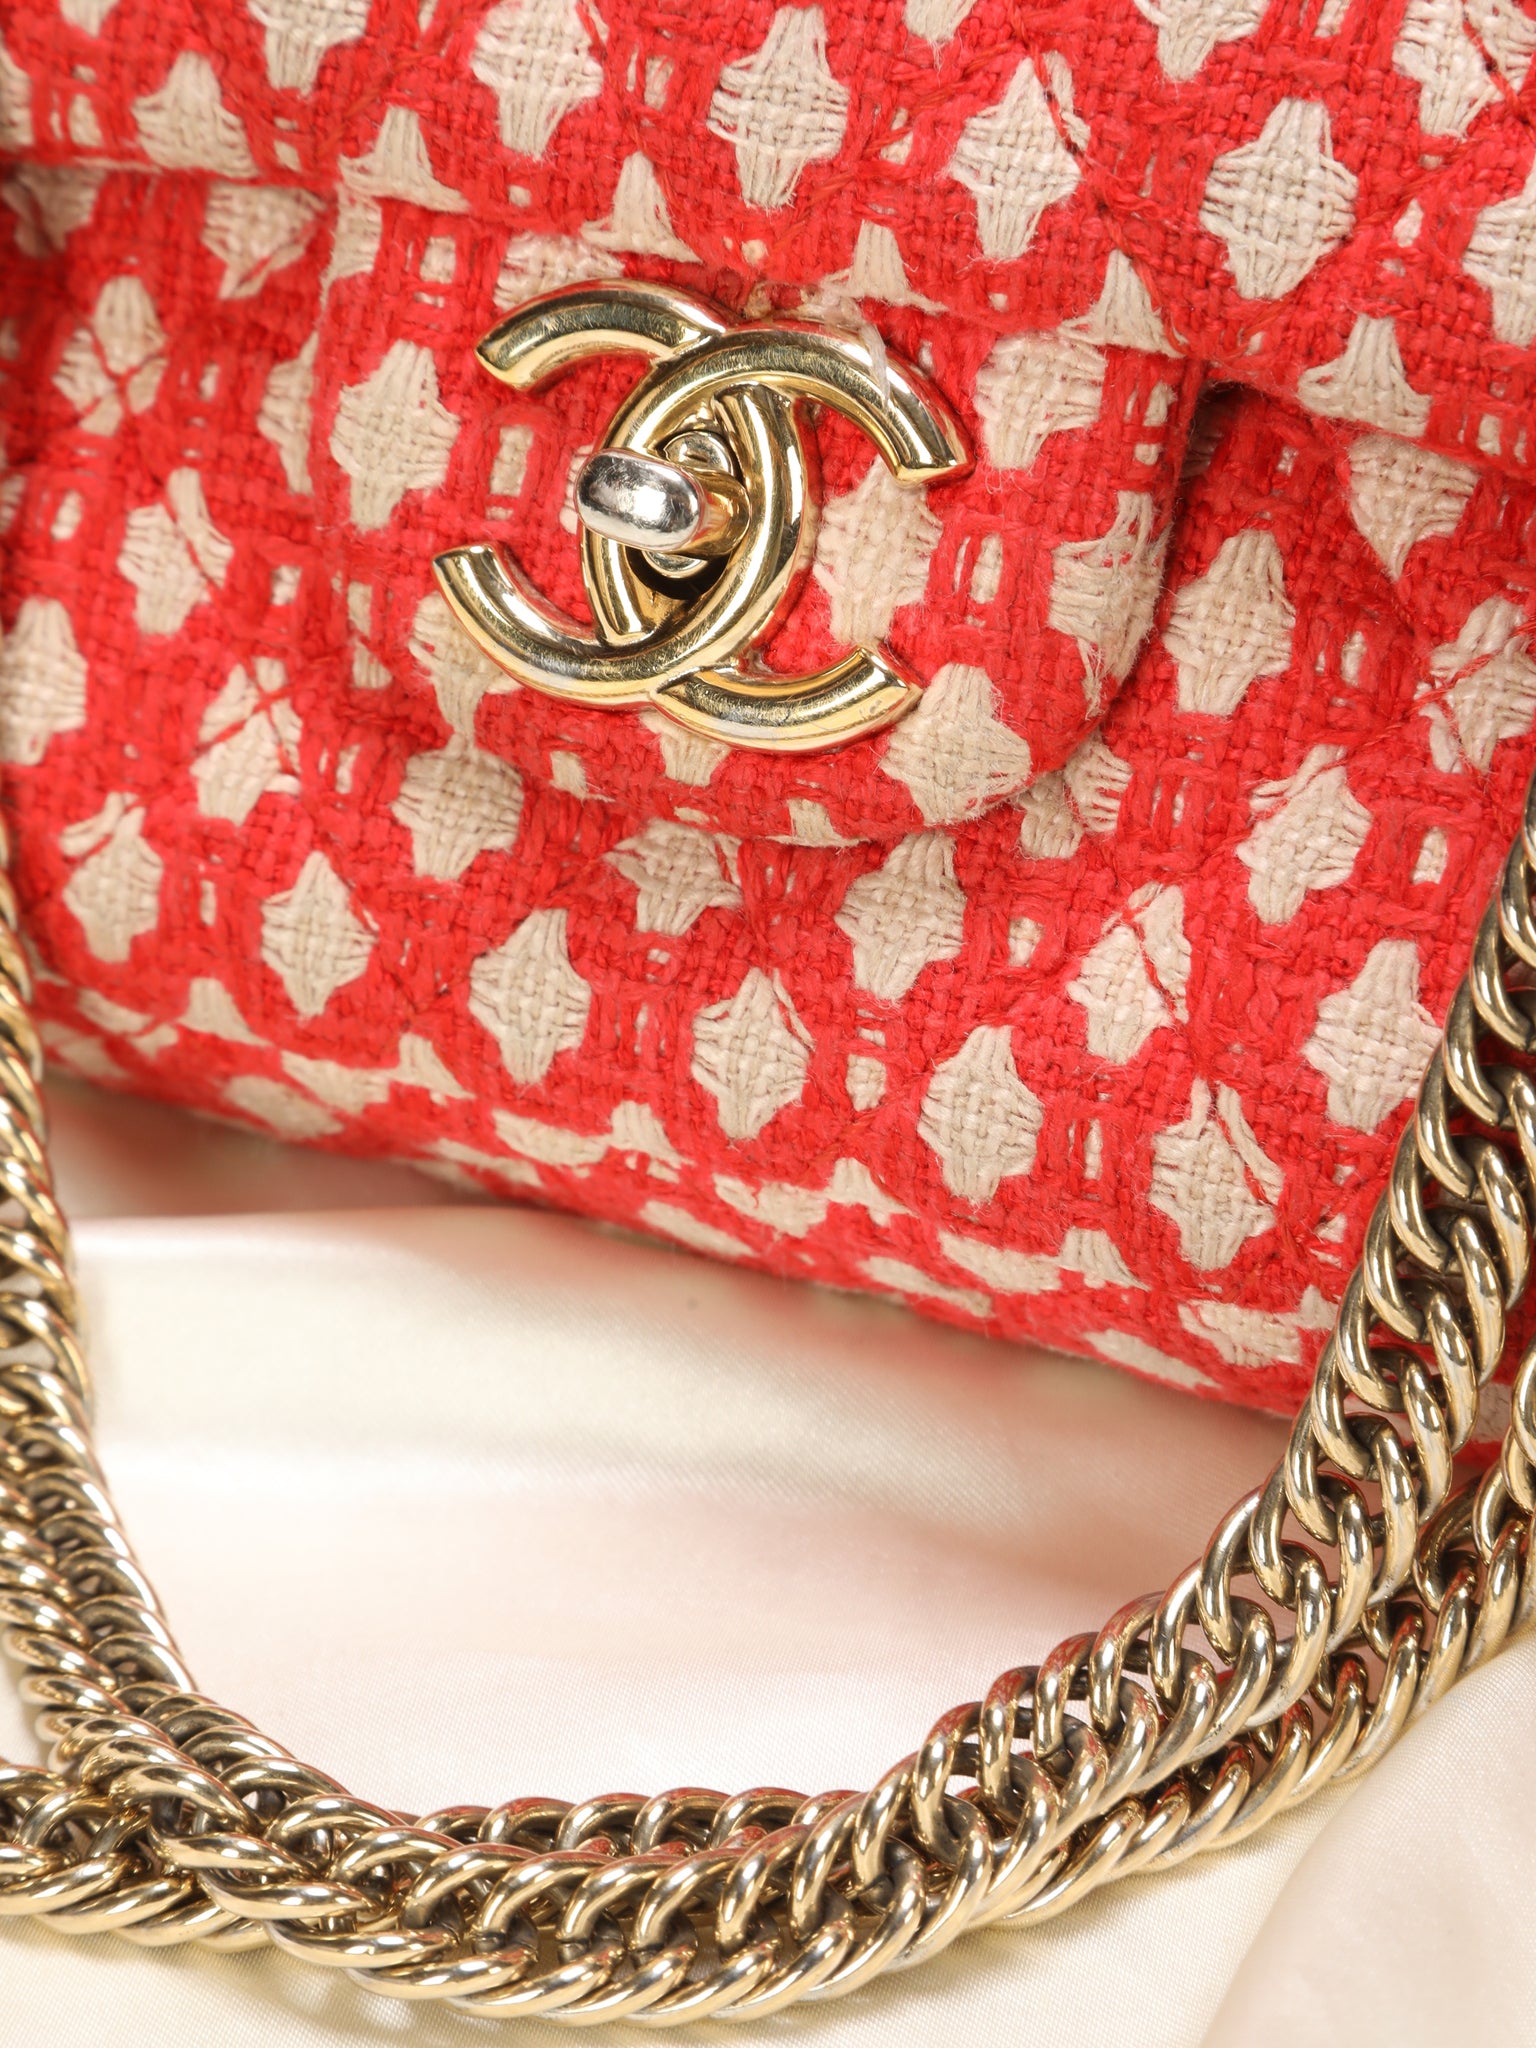 Chanel Red Tweed Double Flap Bag